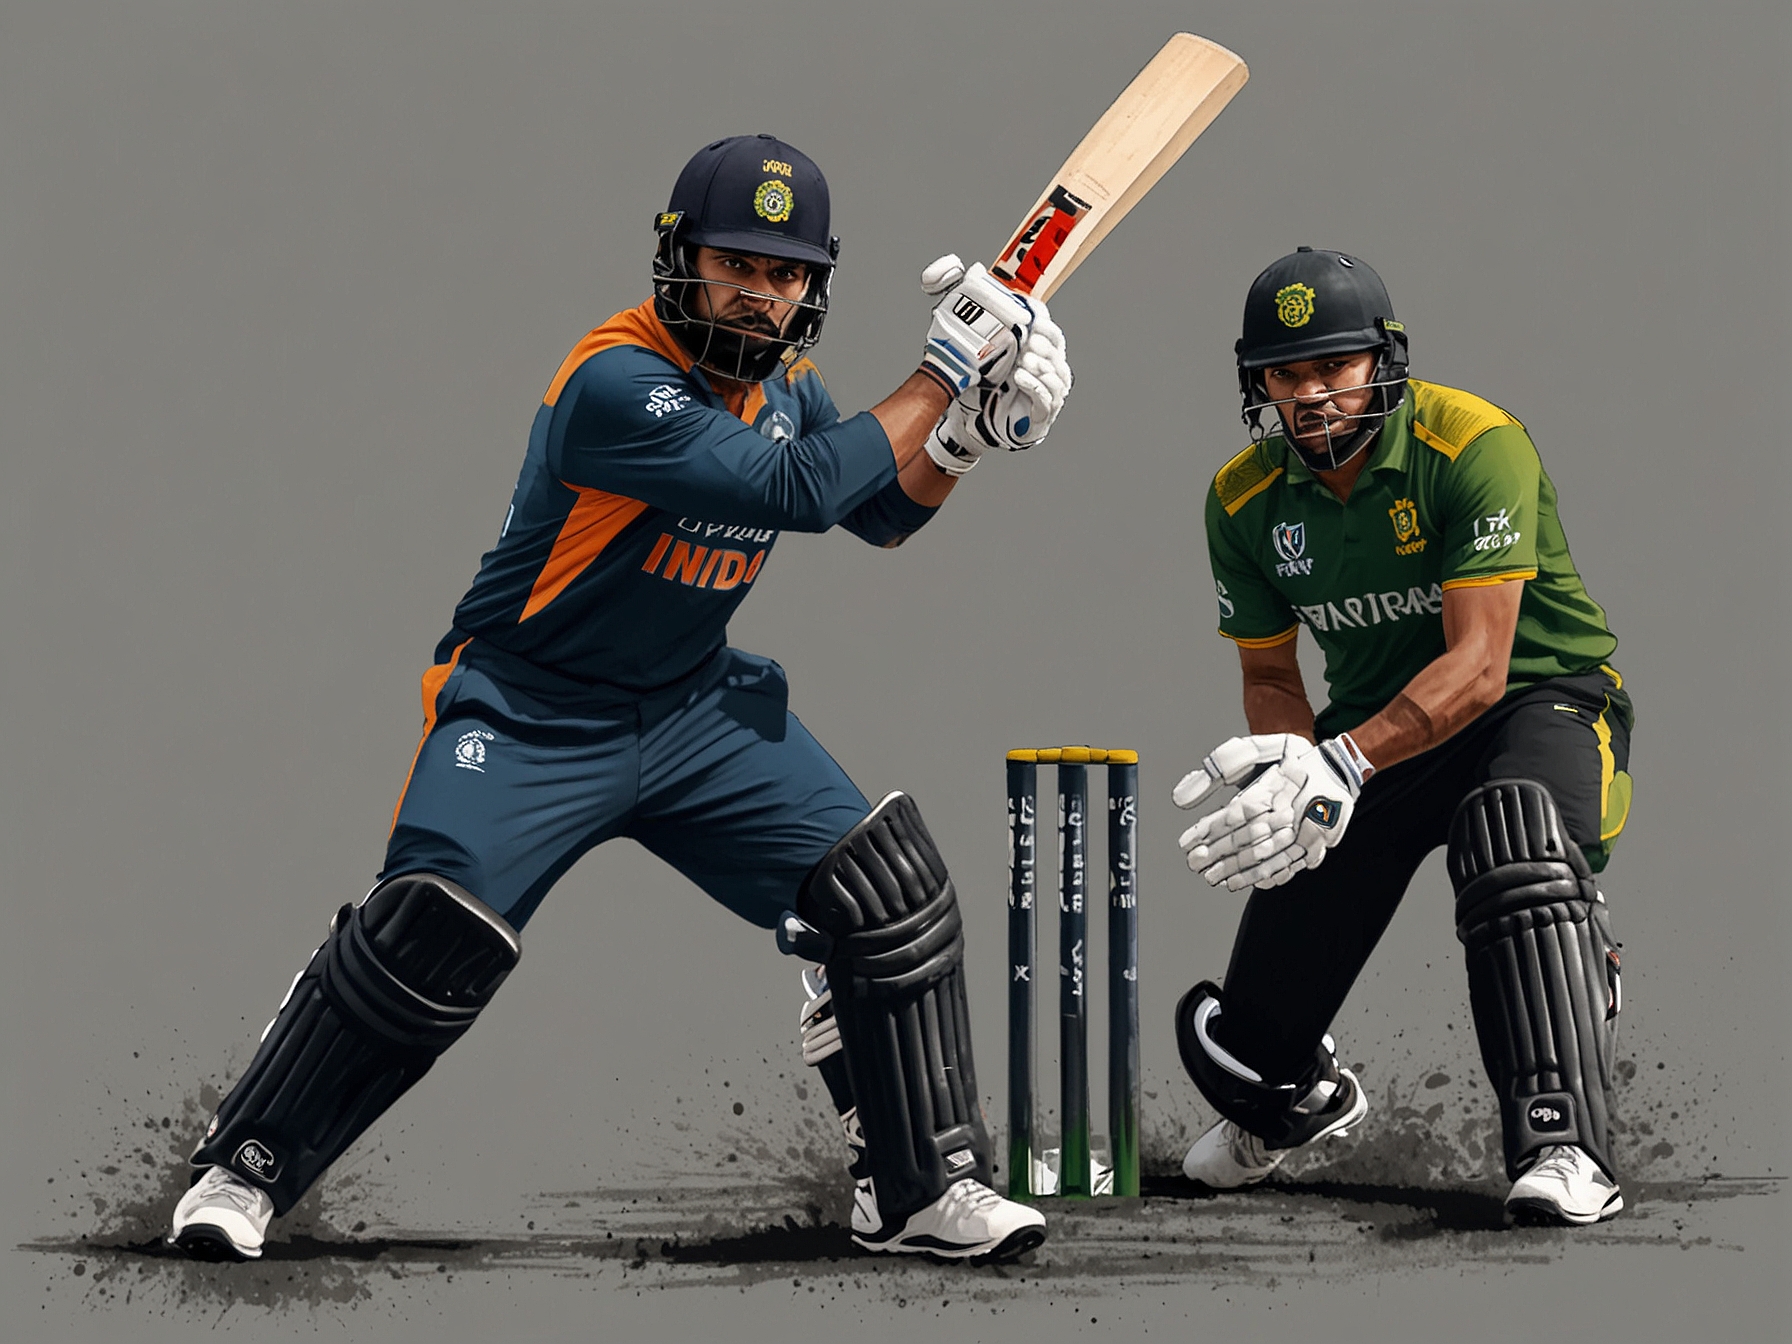 Star cricketers from South Africa and India, such as Virat Kohli and Quinton de Kock, in action during a high-energy T20 match, symbolizing the intense competition expected in the upcoming series.